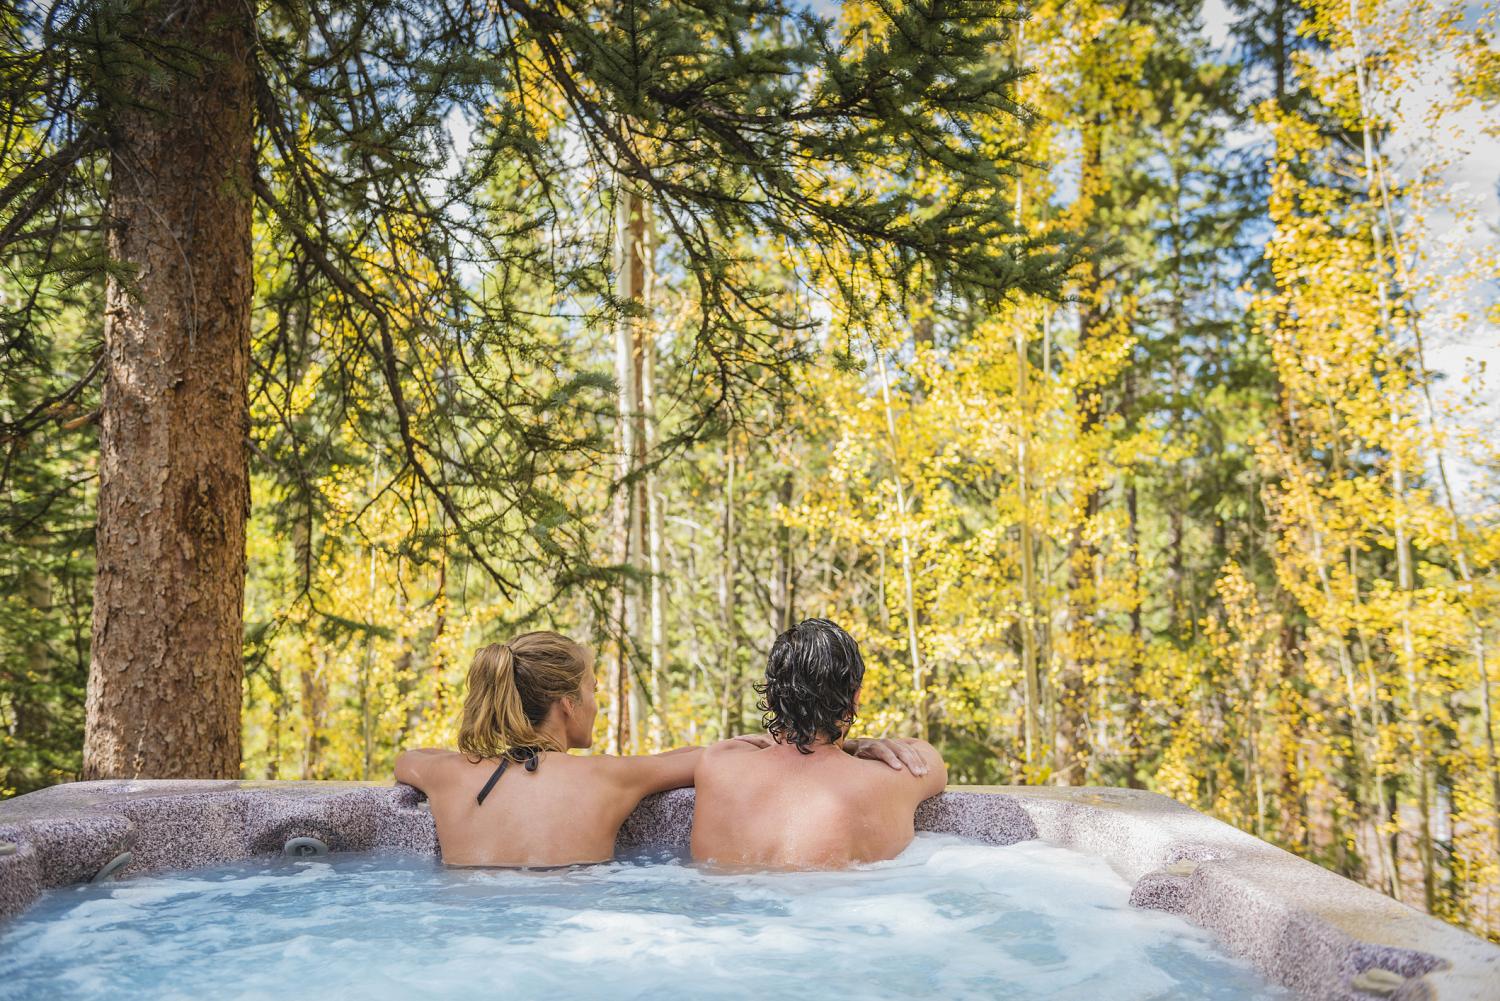 5 reasons to trade in your hot tub this fall